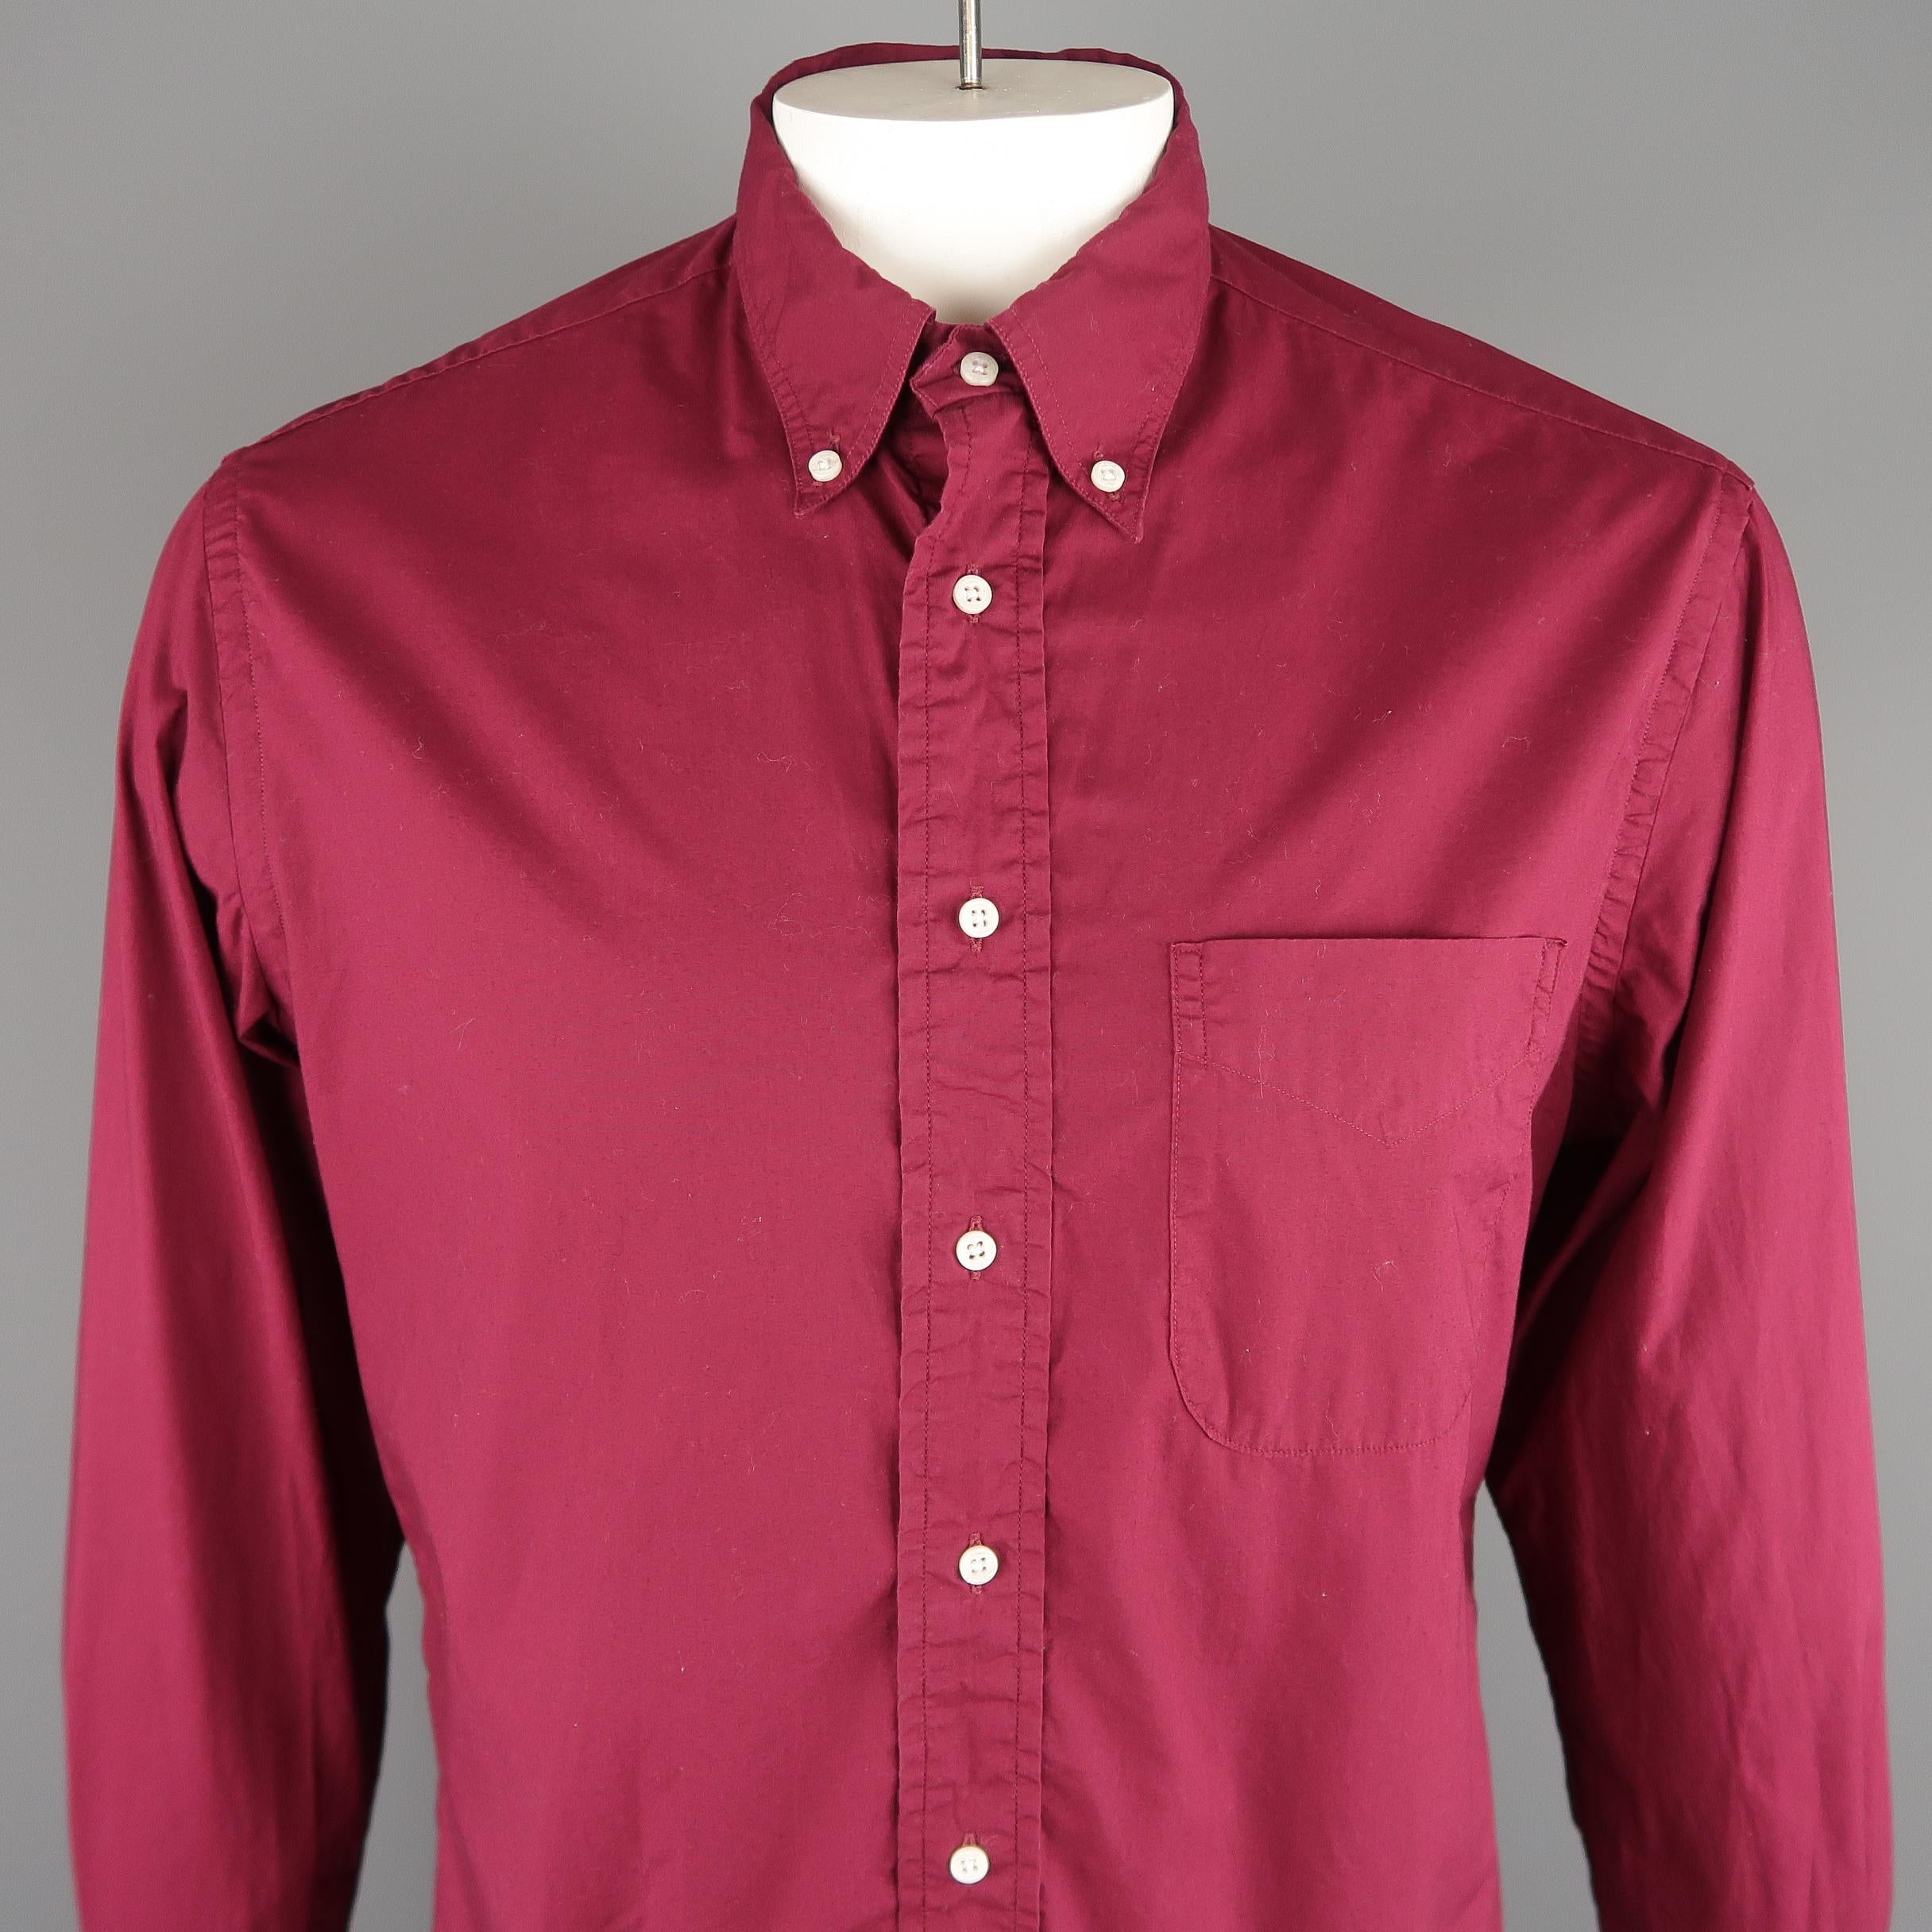 GITMAN VINTAGE long sleeve shirt come in burgundy solid cotton with a front pocket and button down. Made in USA.
 
Excellent Pre-Owned Condition.
Marked: L
 
Measurements:
 
Shoulder: 18 in.
Chest: 47 in.
Sleeve: 26.5 in.
Length: 32  in.